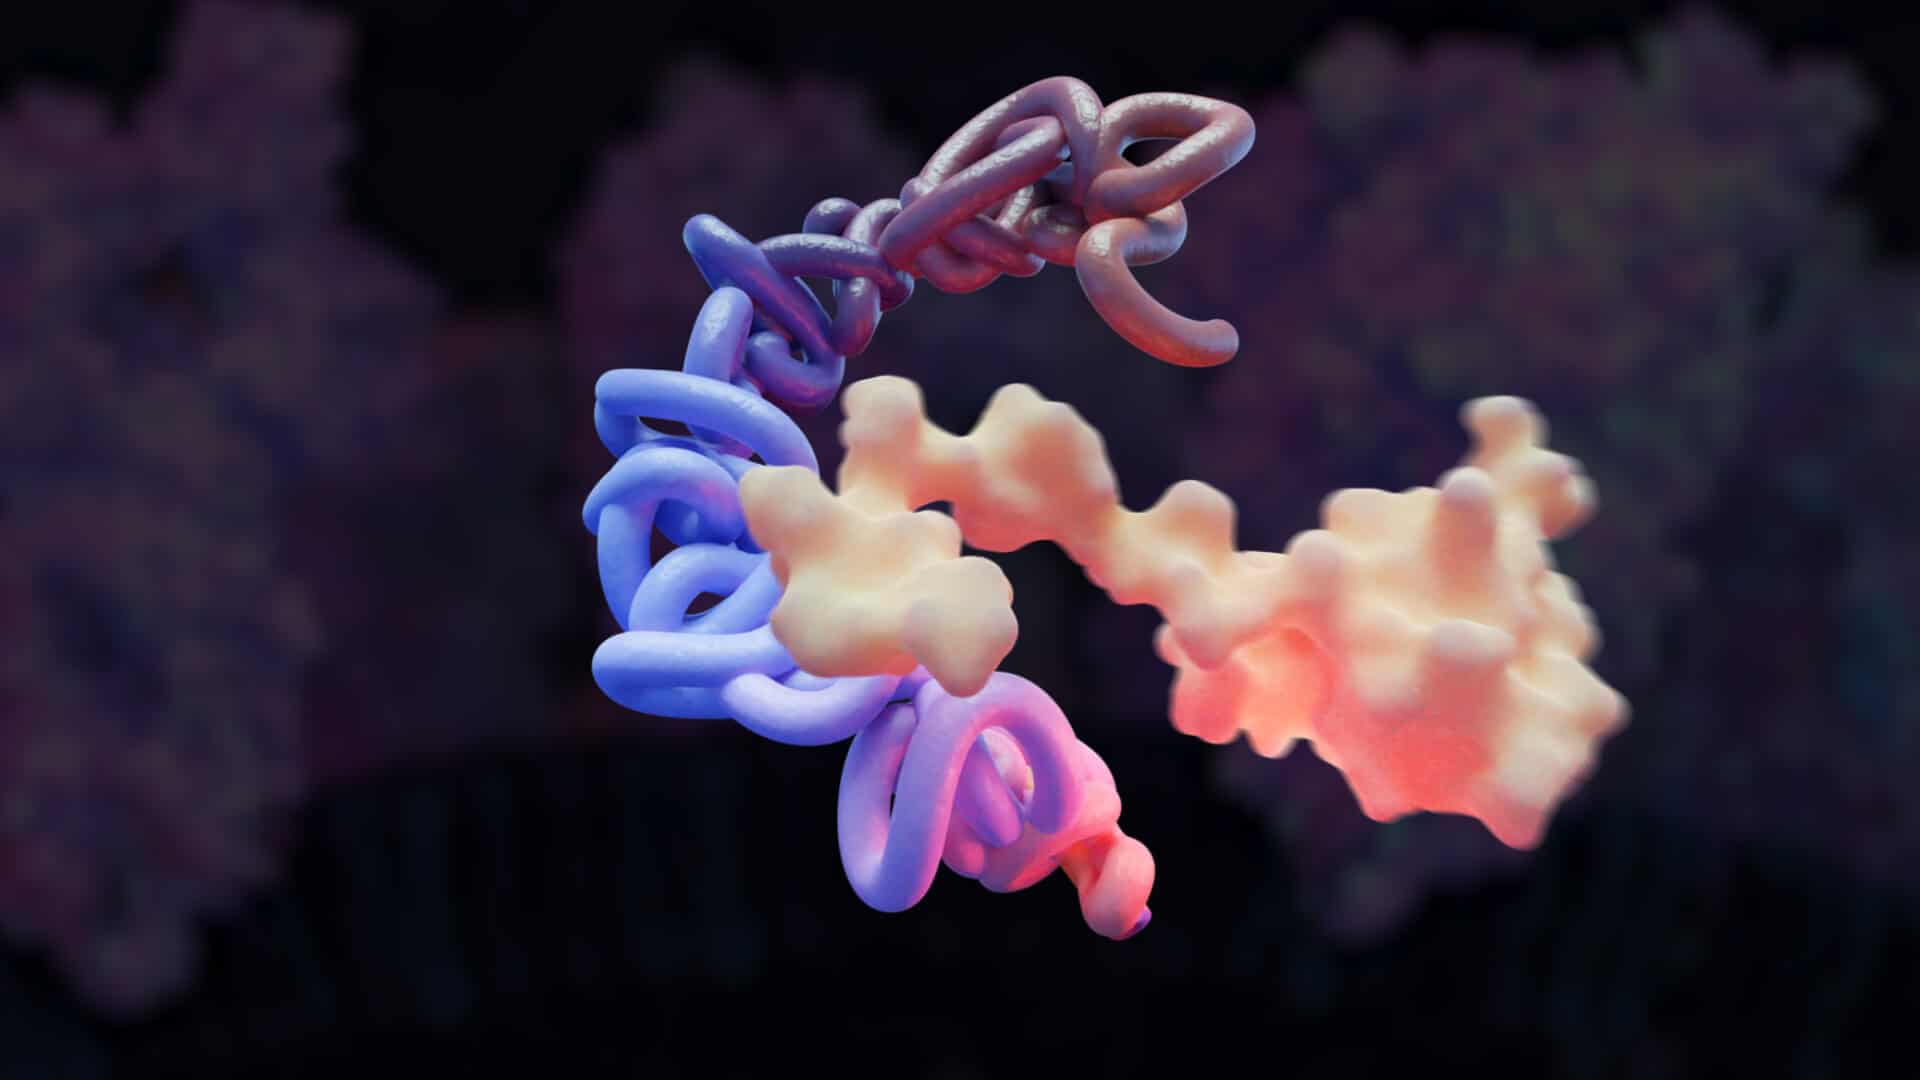 This is an image of a protein combining with another protein.